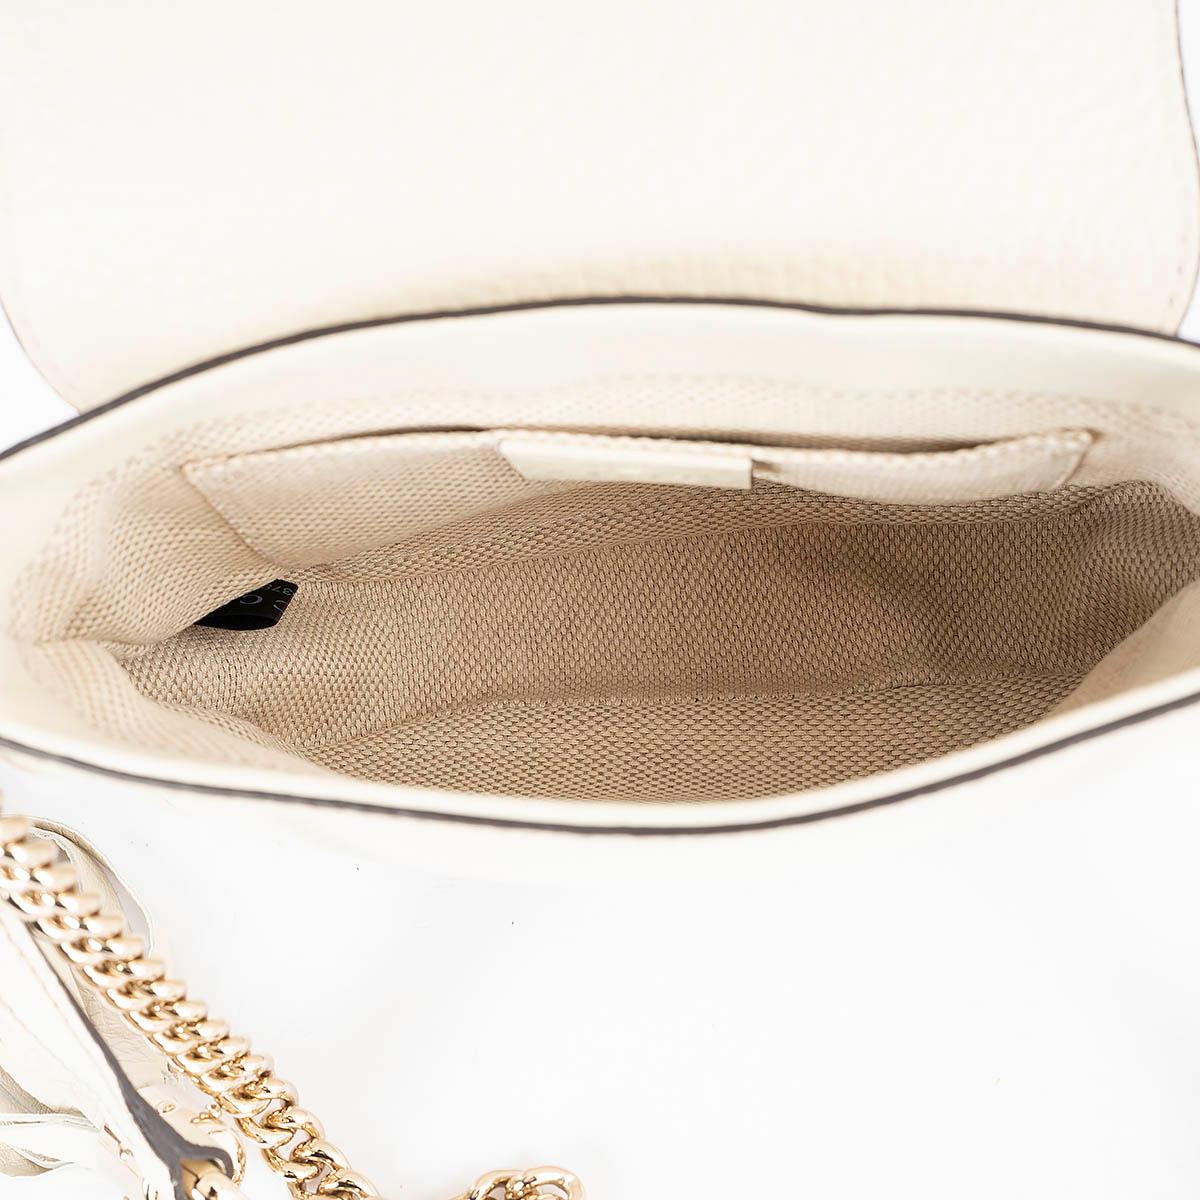 GUCCI ivory leather SMALL SOHO FLAP Shoulder Bag In Excellent Condition For Sale In Zürich, CH